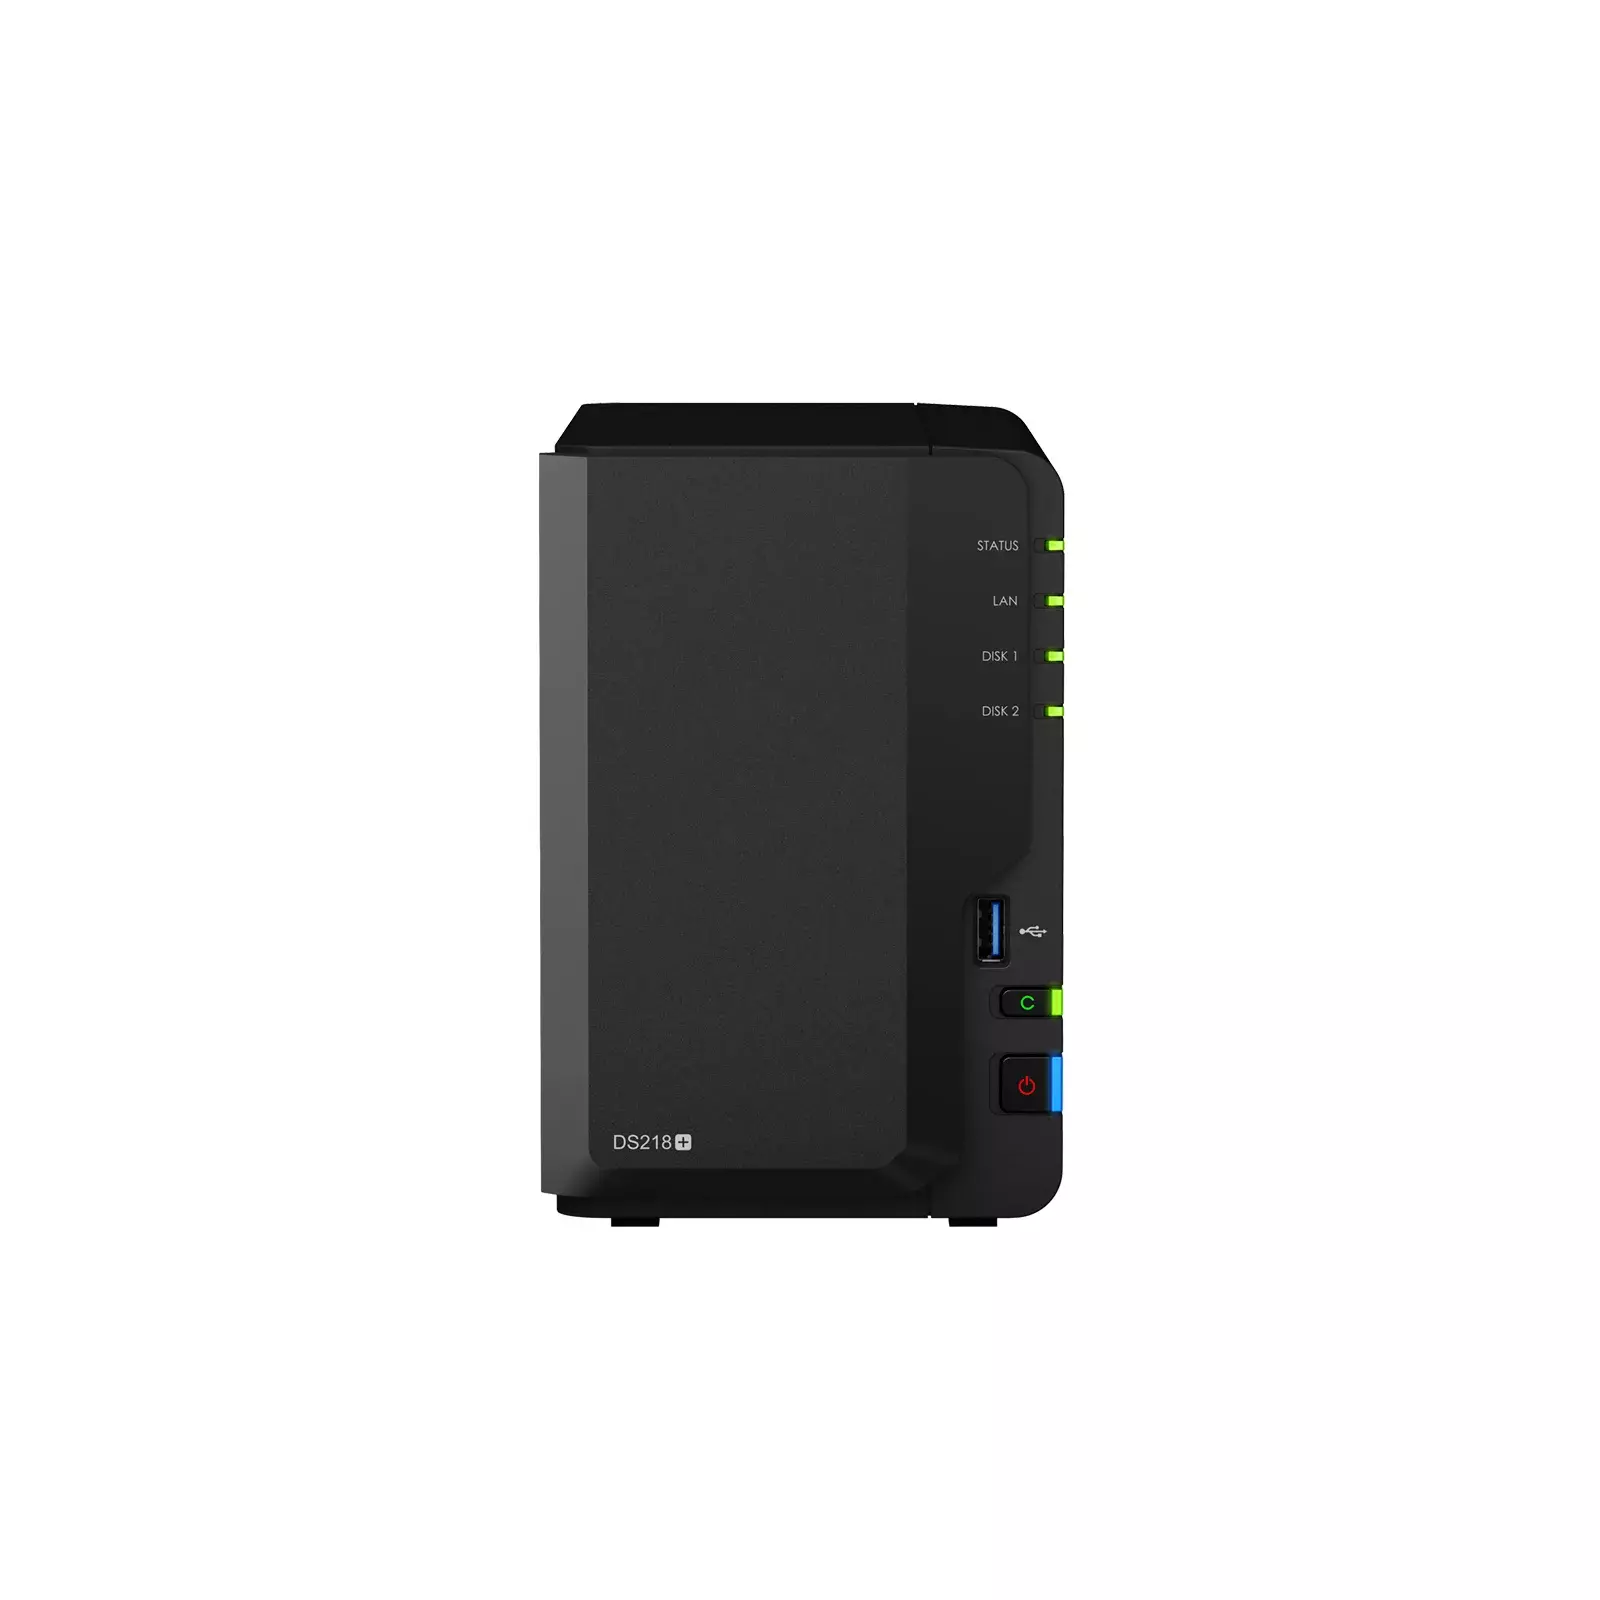 Synology DiskStation DS218+ NAS Compact DS218+_+2X4TB N300 | NAS